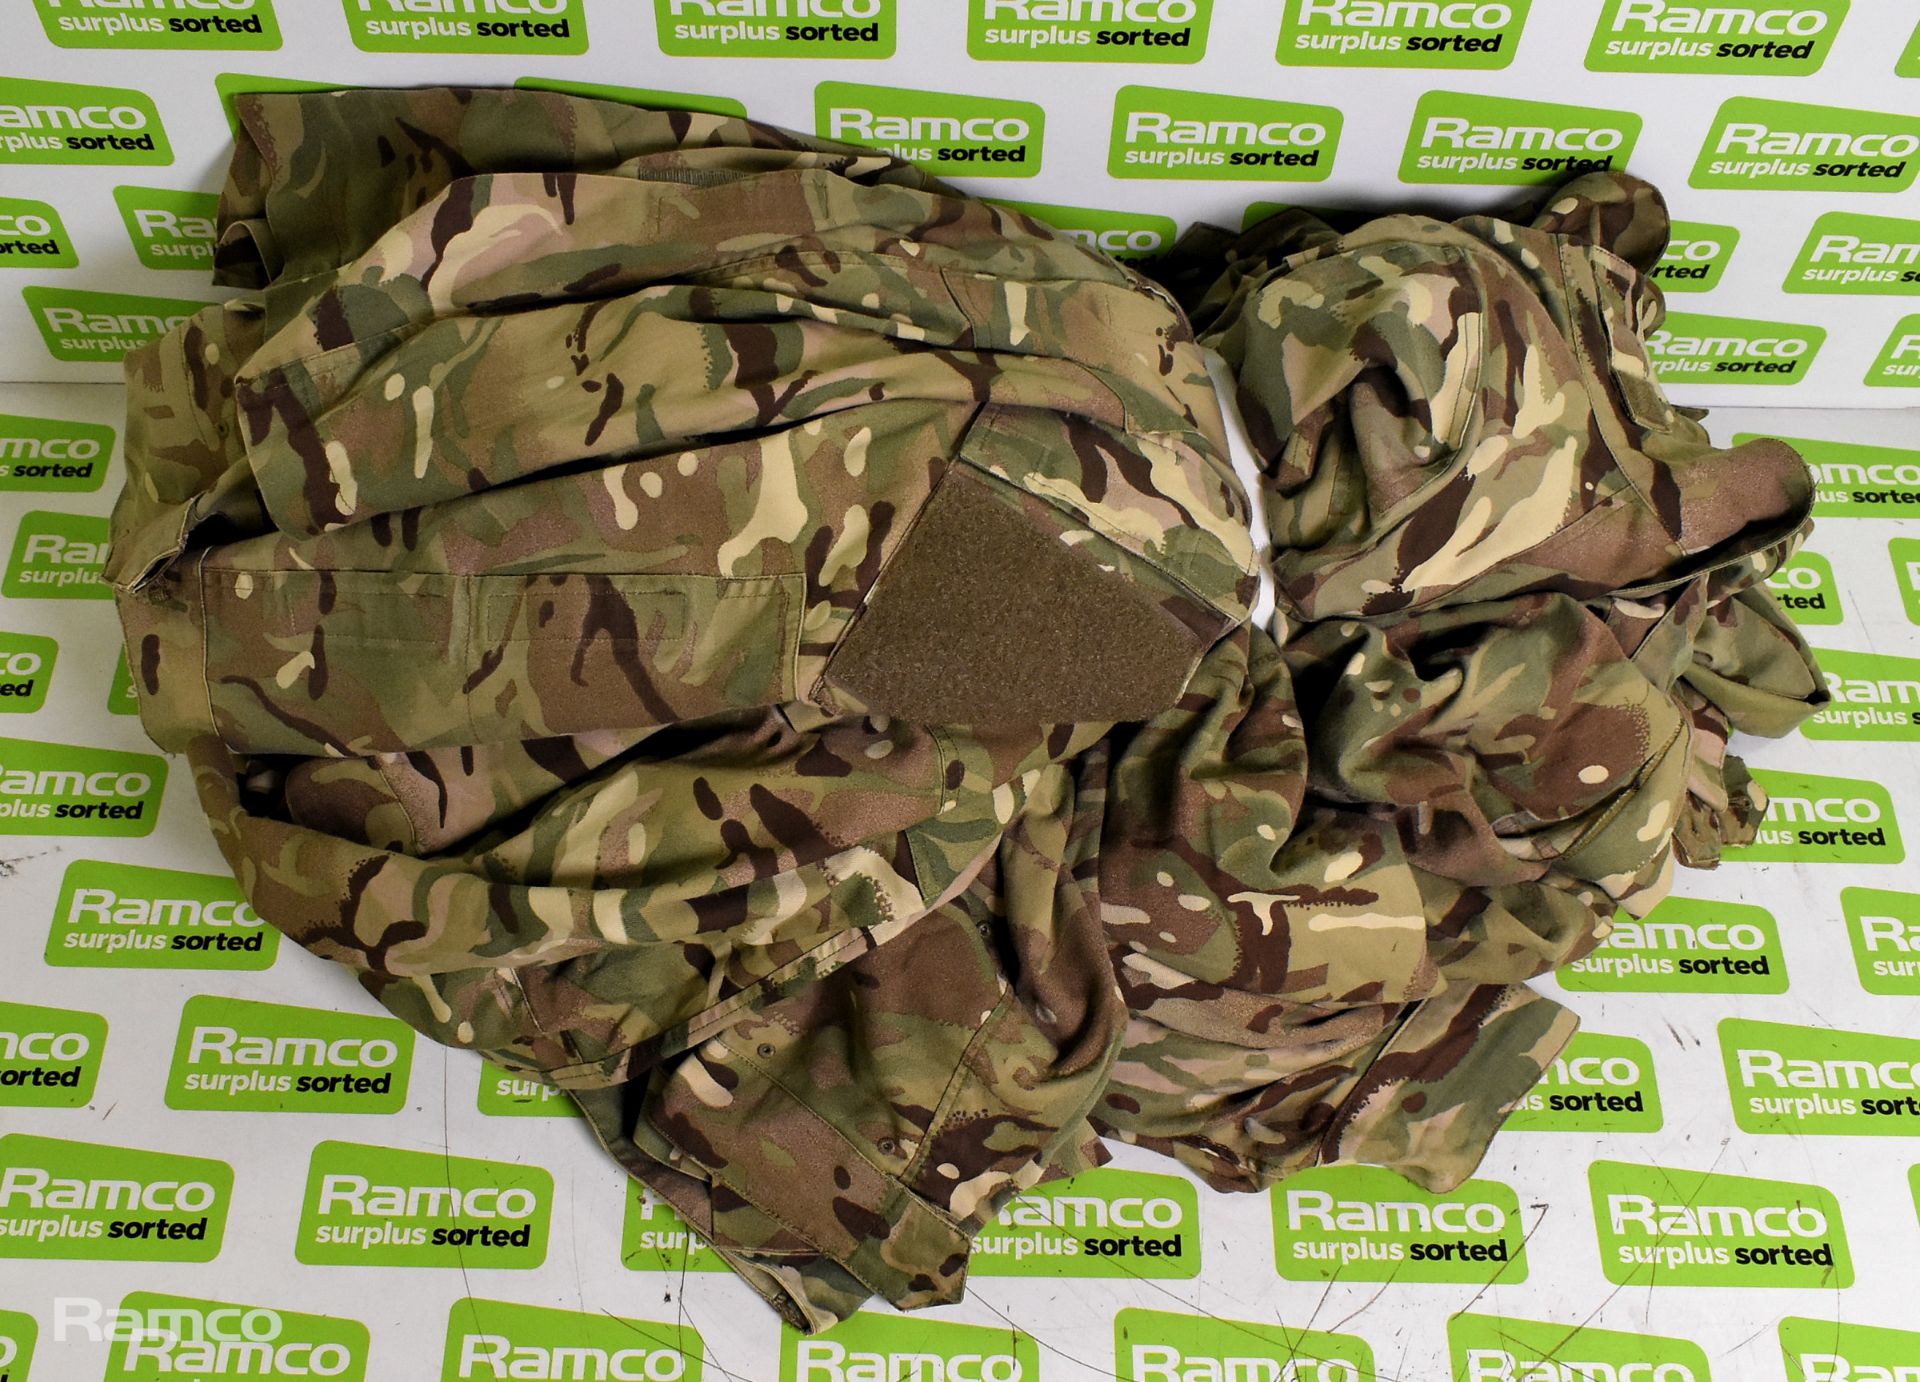 60x British Army MTP combat jackets warm weather - mixed grades and sizes - Image 7 of 7